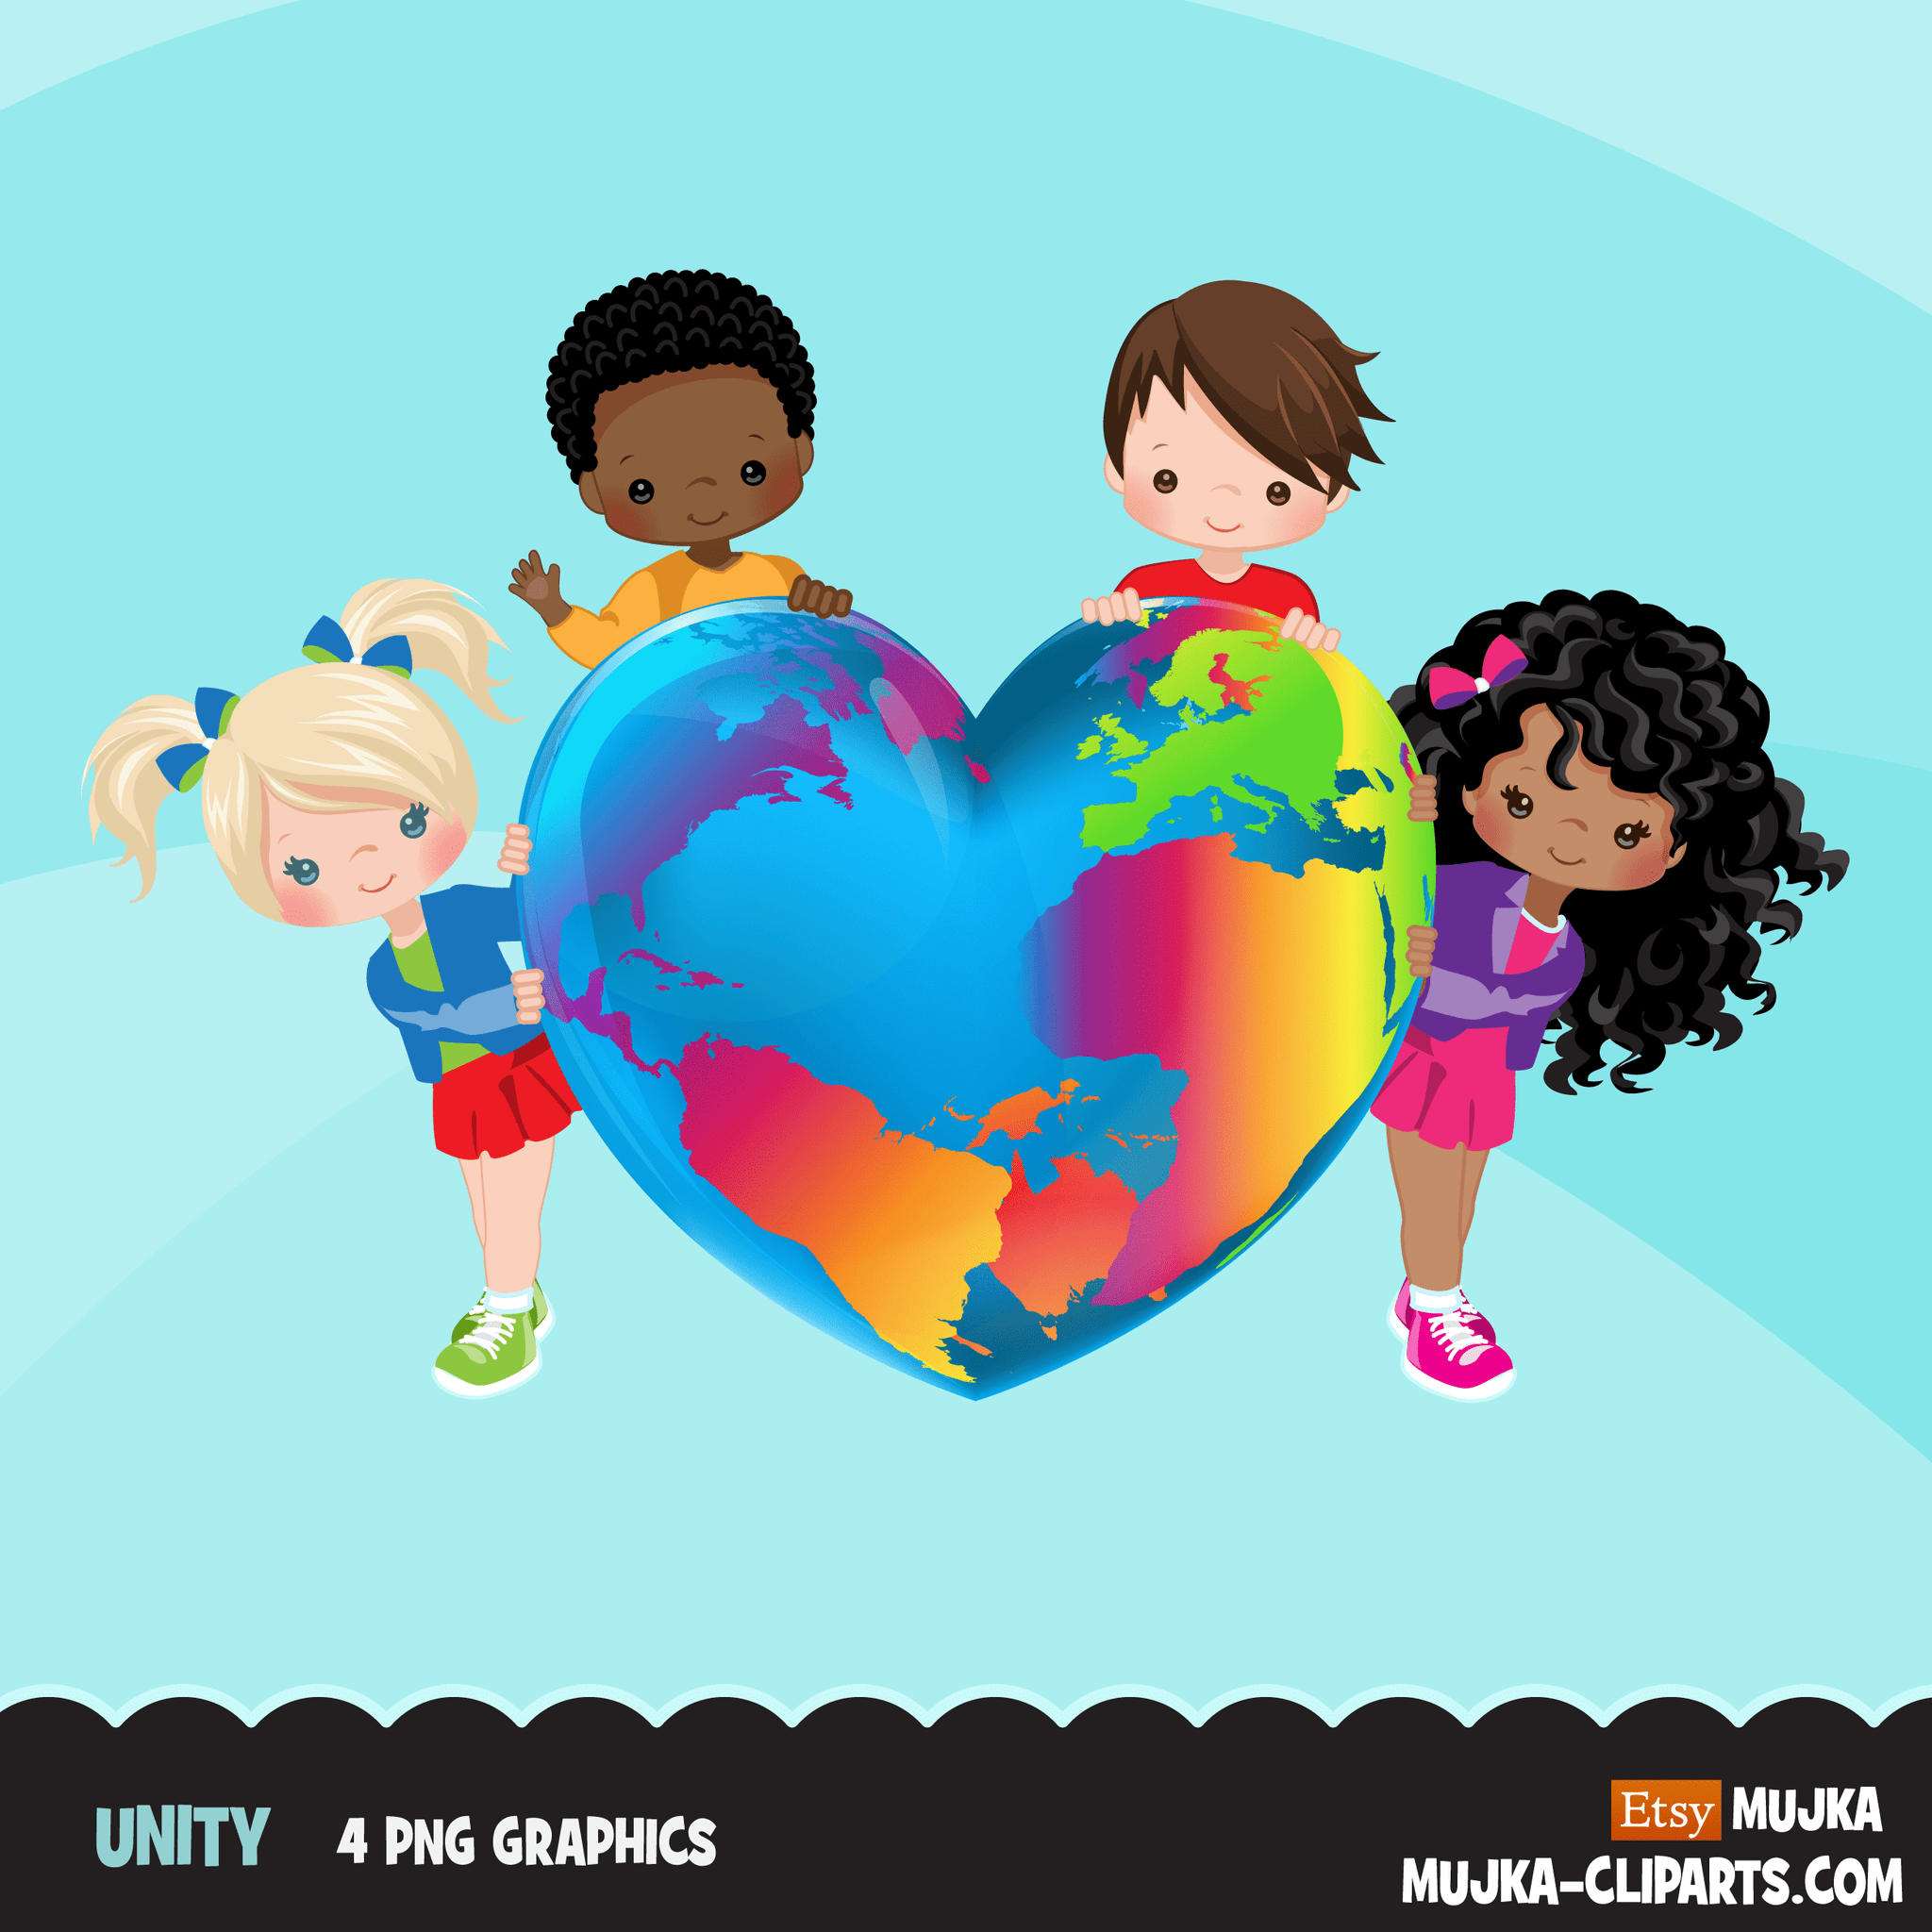 Free Unity clipart, Brothers and sisters, heart shape globe rainbow digital PNG